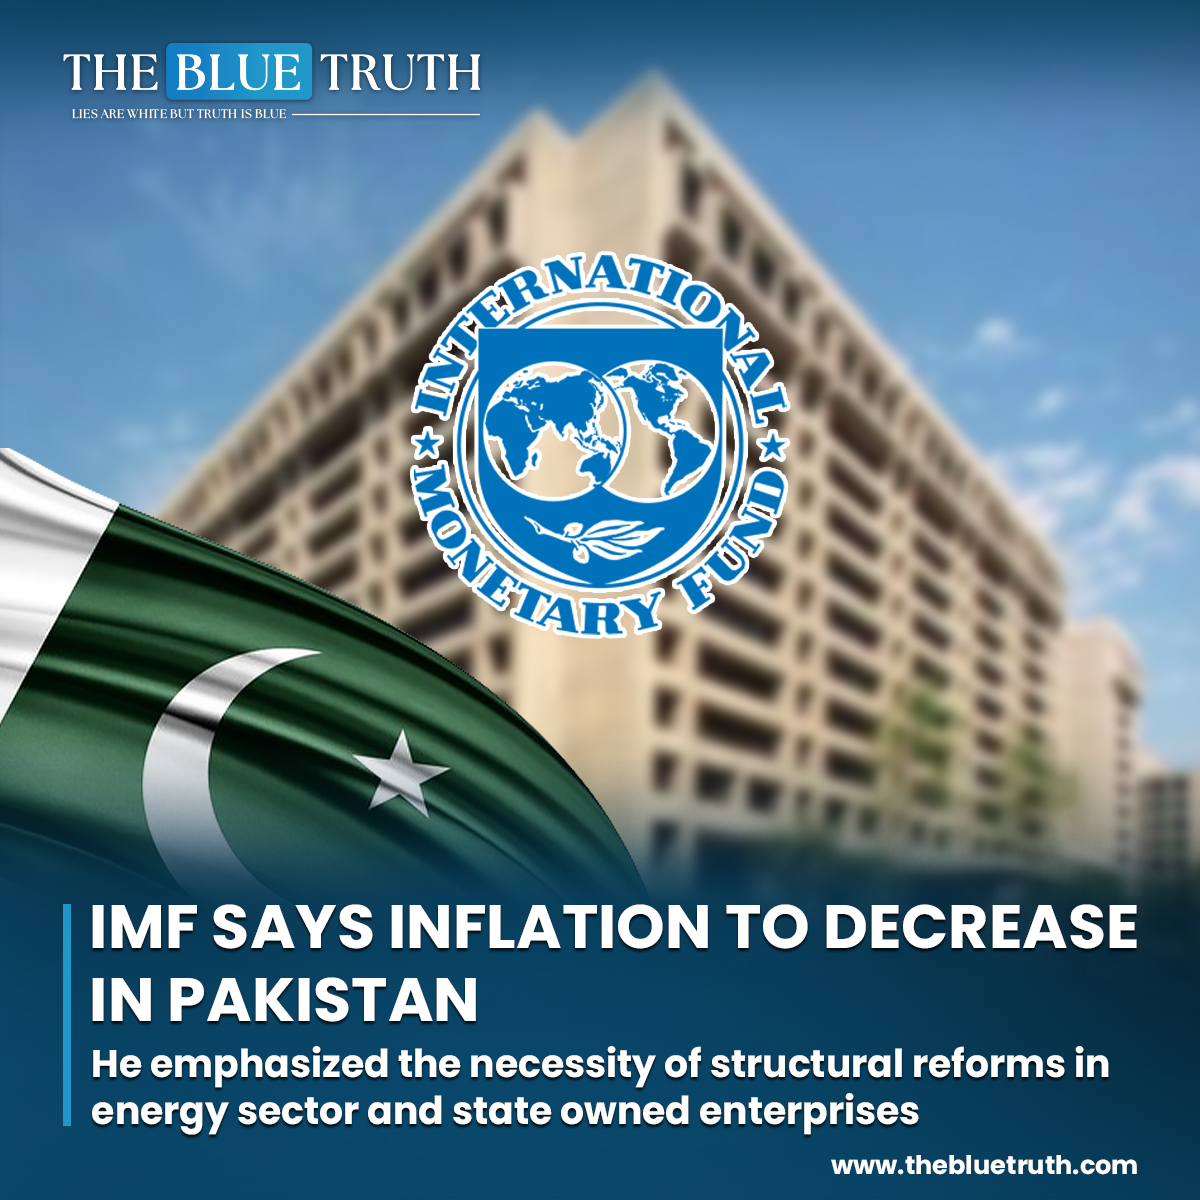 IMF shed light on Pakistan's economic landscape, emphasizing both progress and the need for further action.

#IMF #Inflation #PakistanEconomy #StructuralReforms
#EnergySector #EconomicPolicy #FinancialOutlook #MonetaryPolicy
#EconomicRecovery #tbt #thebluetruth